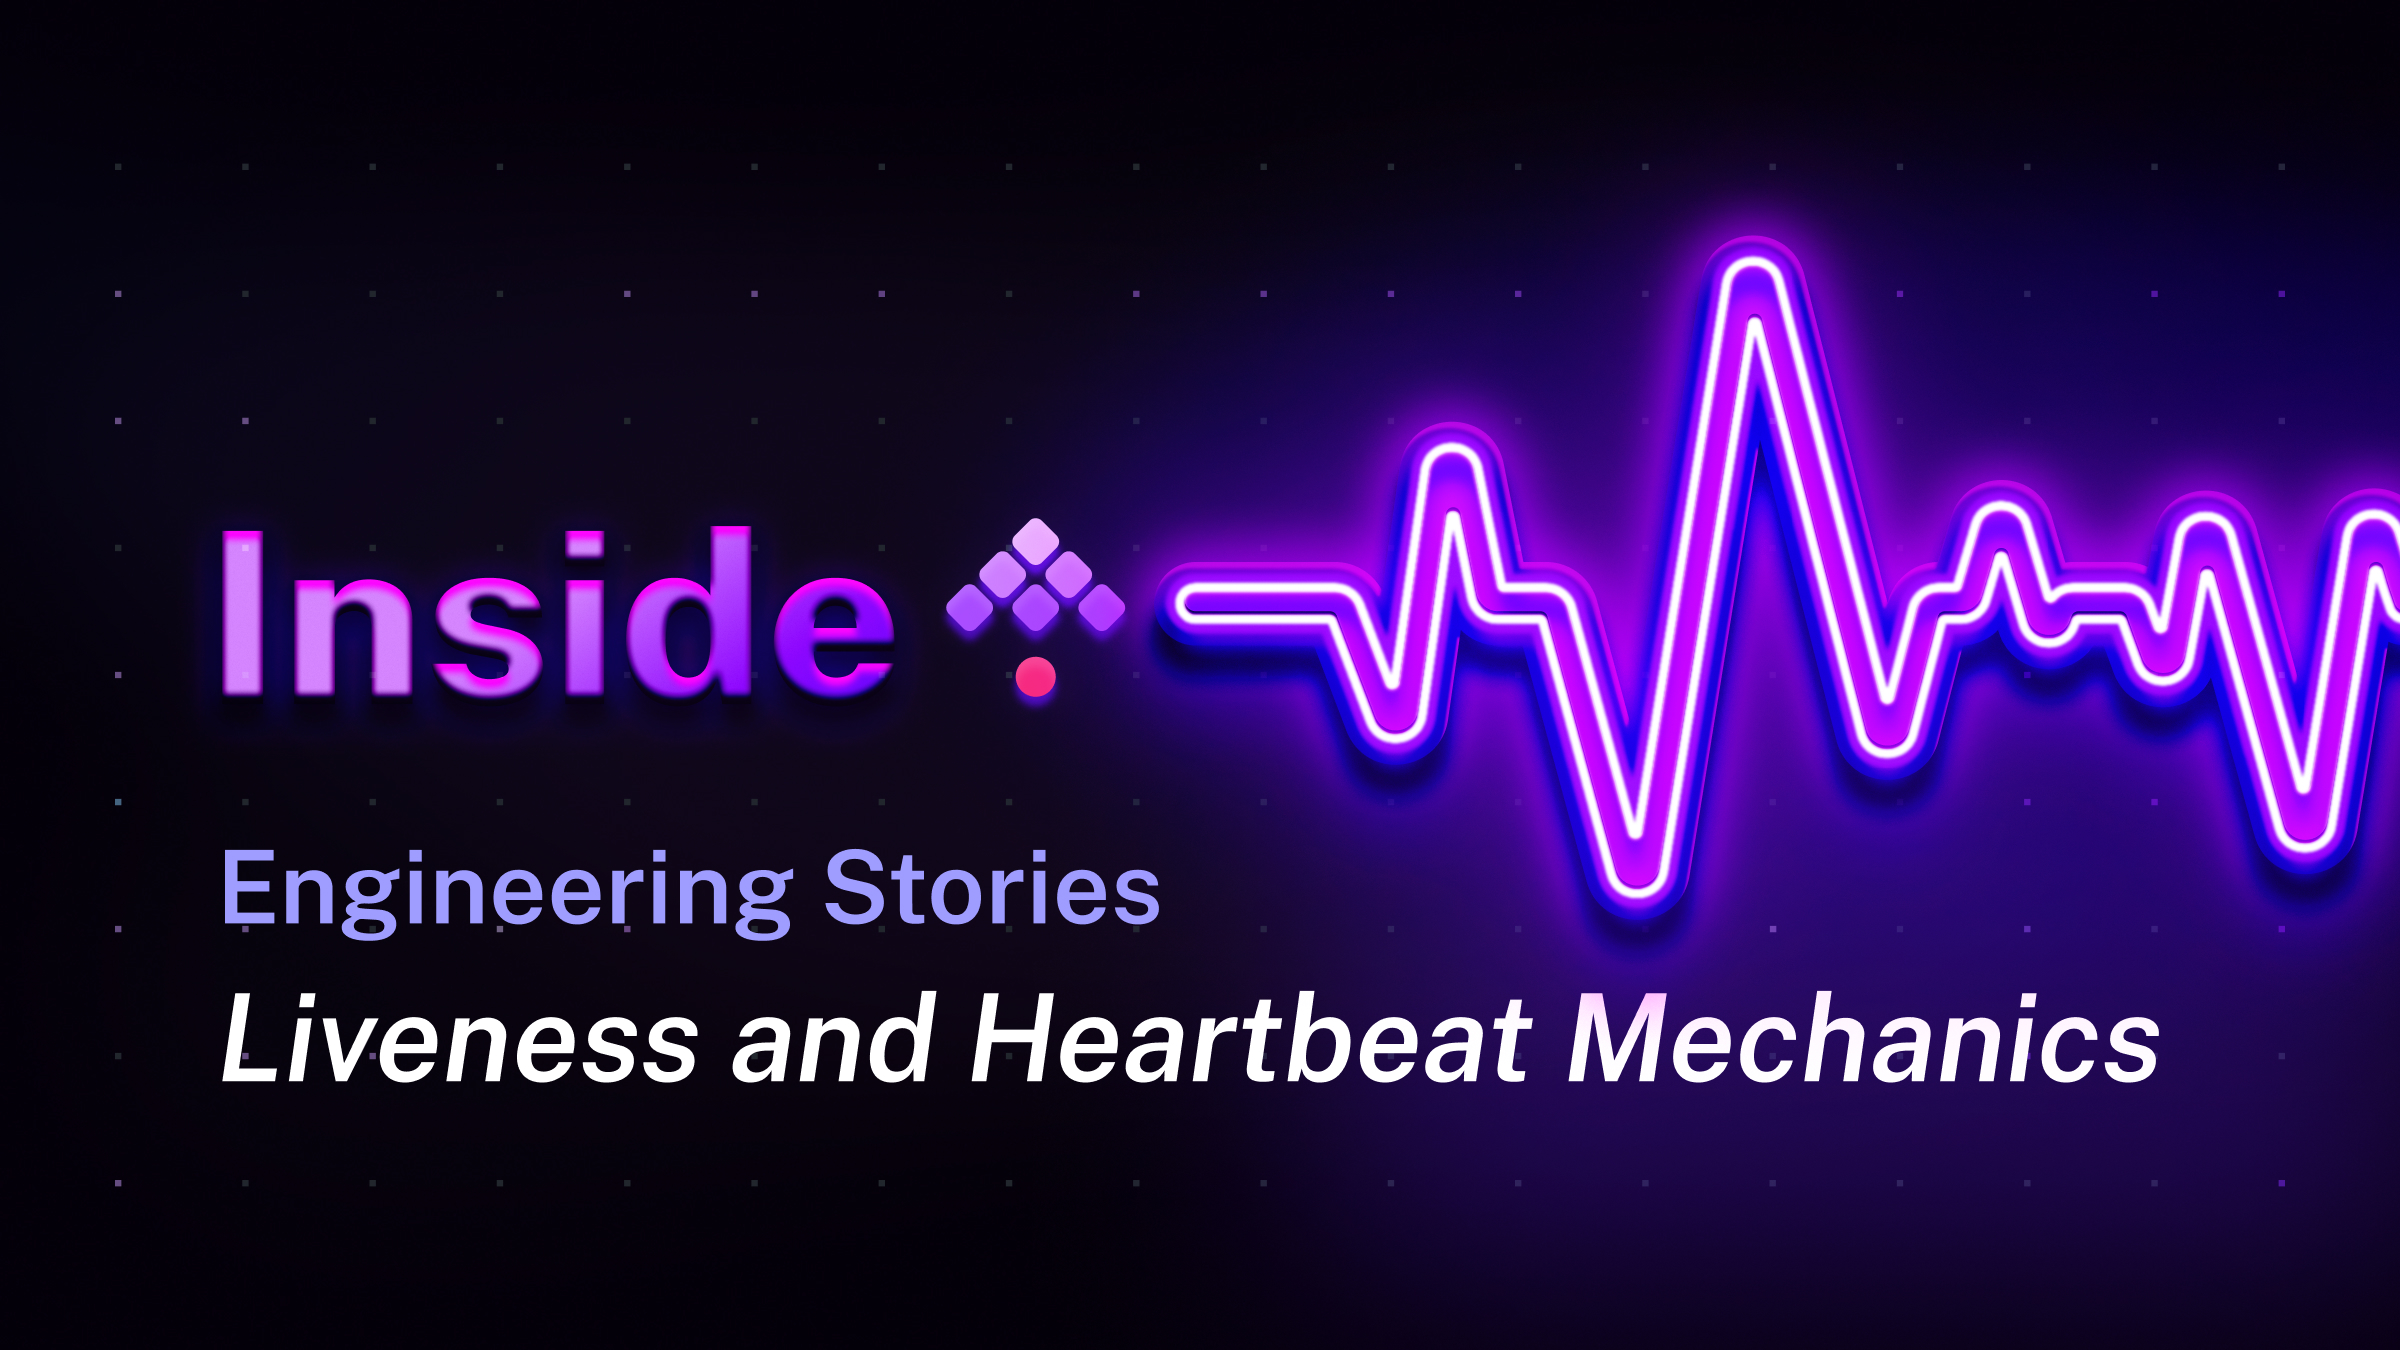 Building A New Liveness and Heartbeat Mechanism For Better Reliability